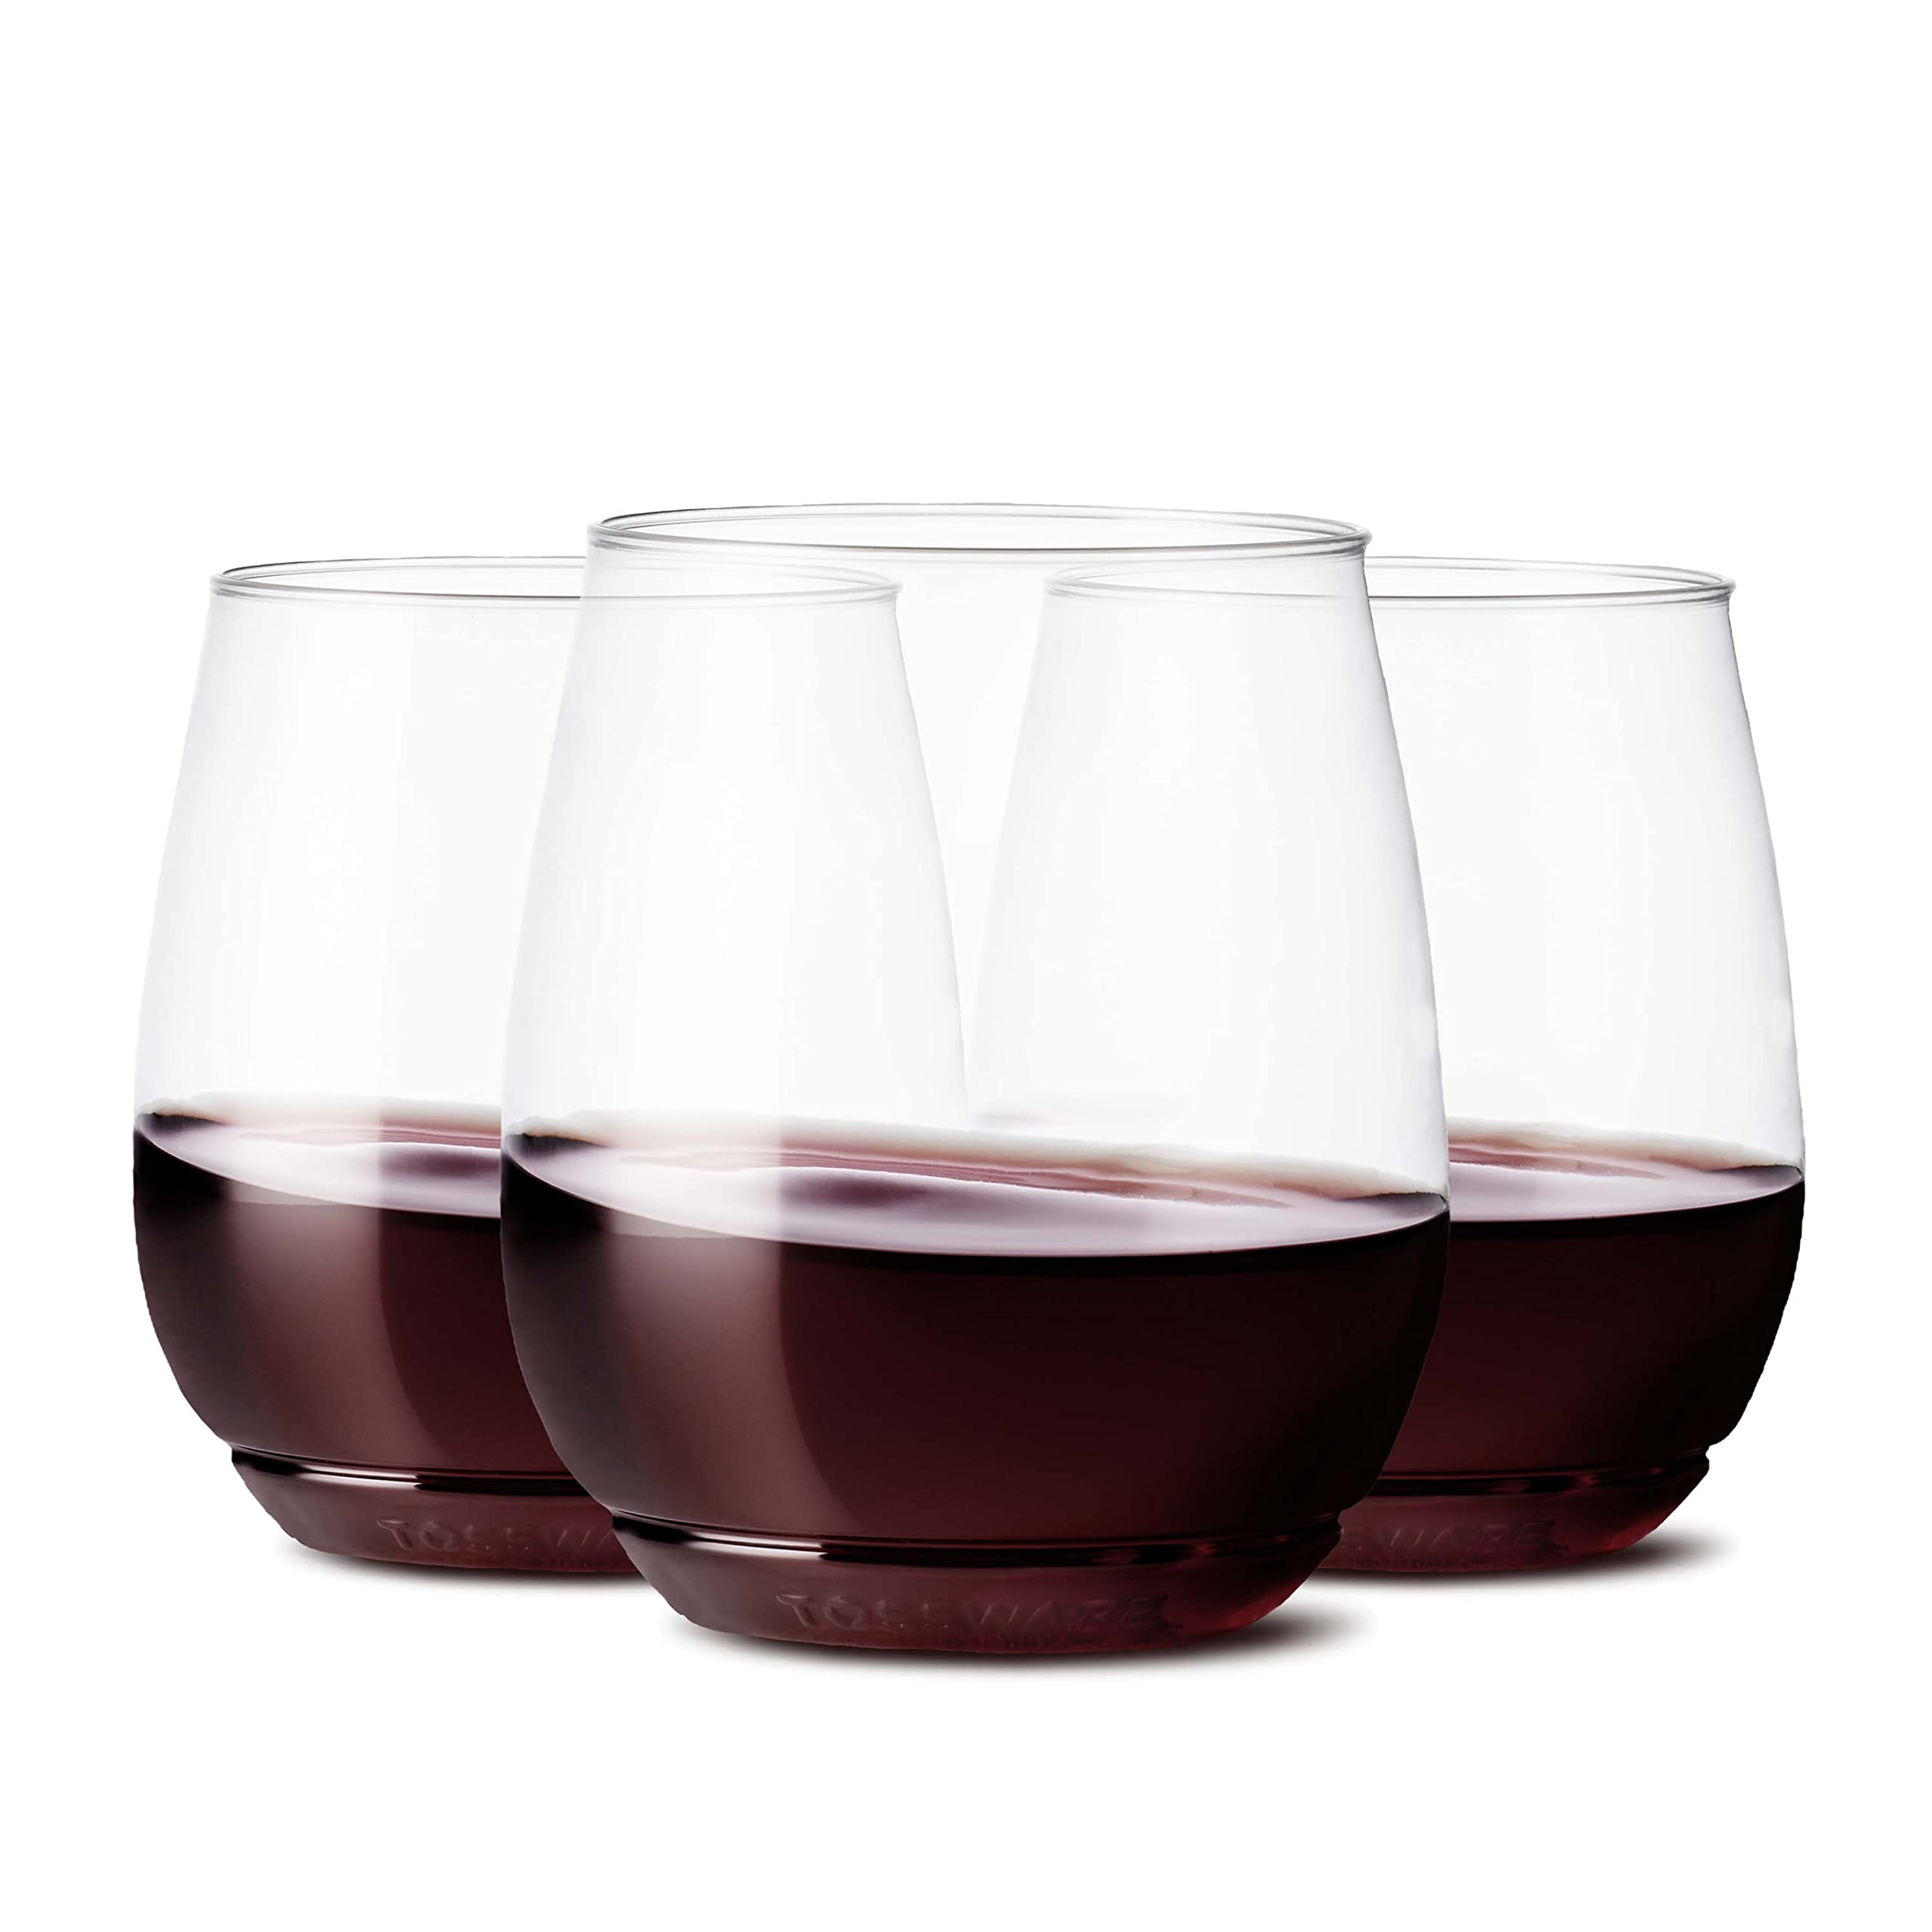 TOSSWARE POP 14oz Vino SET OF 12, Recyclable, Unbreakable & Crystal Clear Plastic Wine Glasses, 12 Count (Pack of 1)